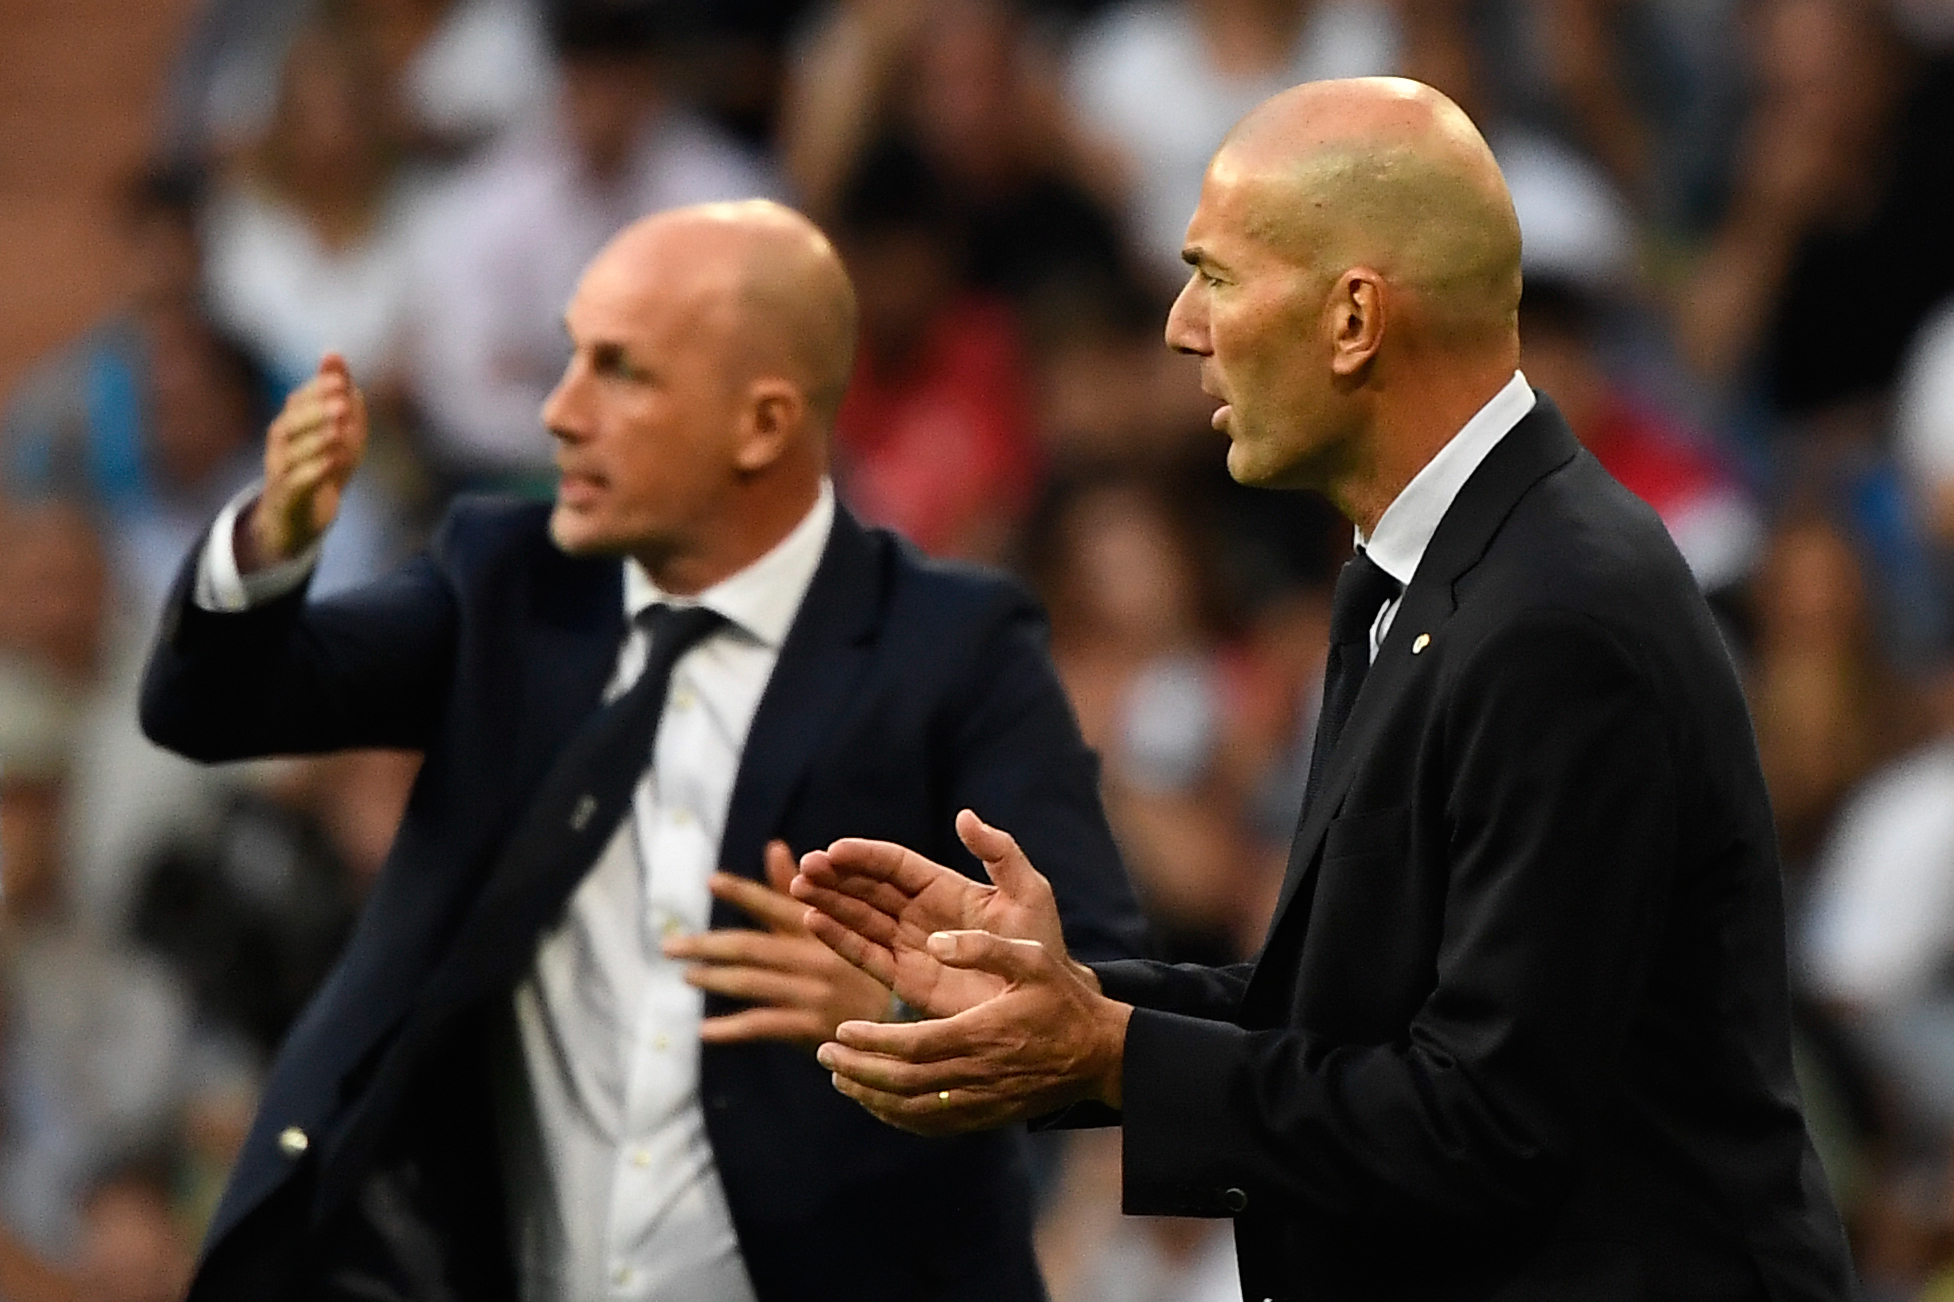 Real Madrid's French coach Zinedine Zidane (R) and Club Brugge's Belgian coach Philippe Clement react during the UEFA Champions league Group A football match between Real Madrid and Club Brugge at the Santiago Bernabeu stadium in Madrid on October 1, 2019. (Photo by PIERRE-PHILIPPE MARCOU / AFP)        (Photo credit should read PIERRE-PHILIPPE MARCOU/AFP via Getty Images)